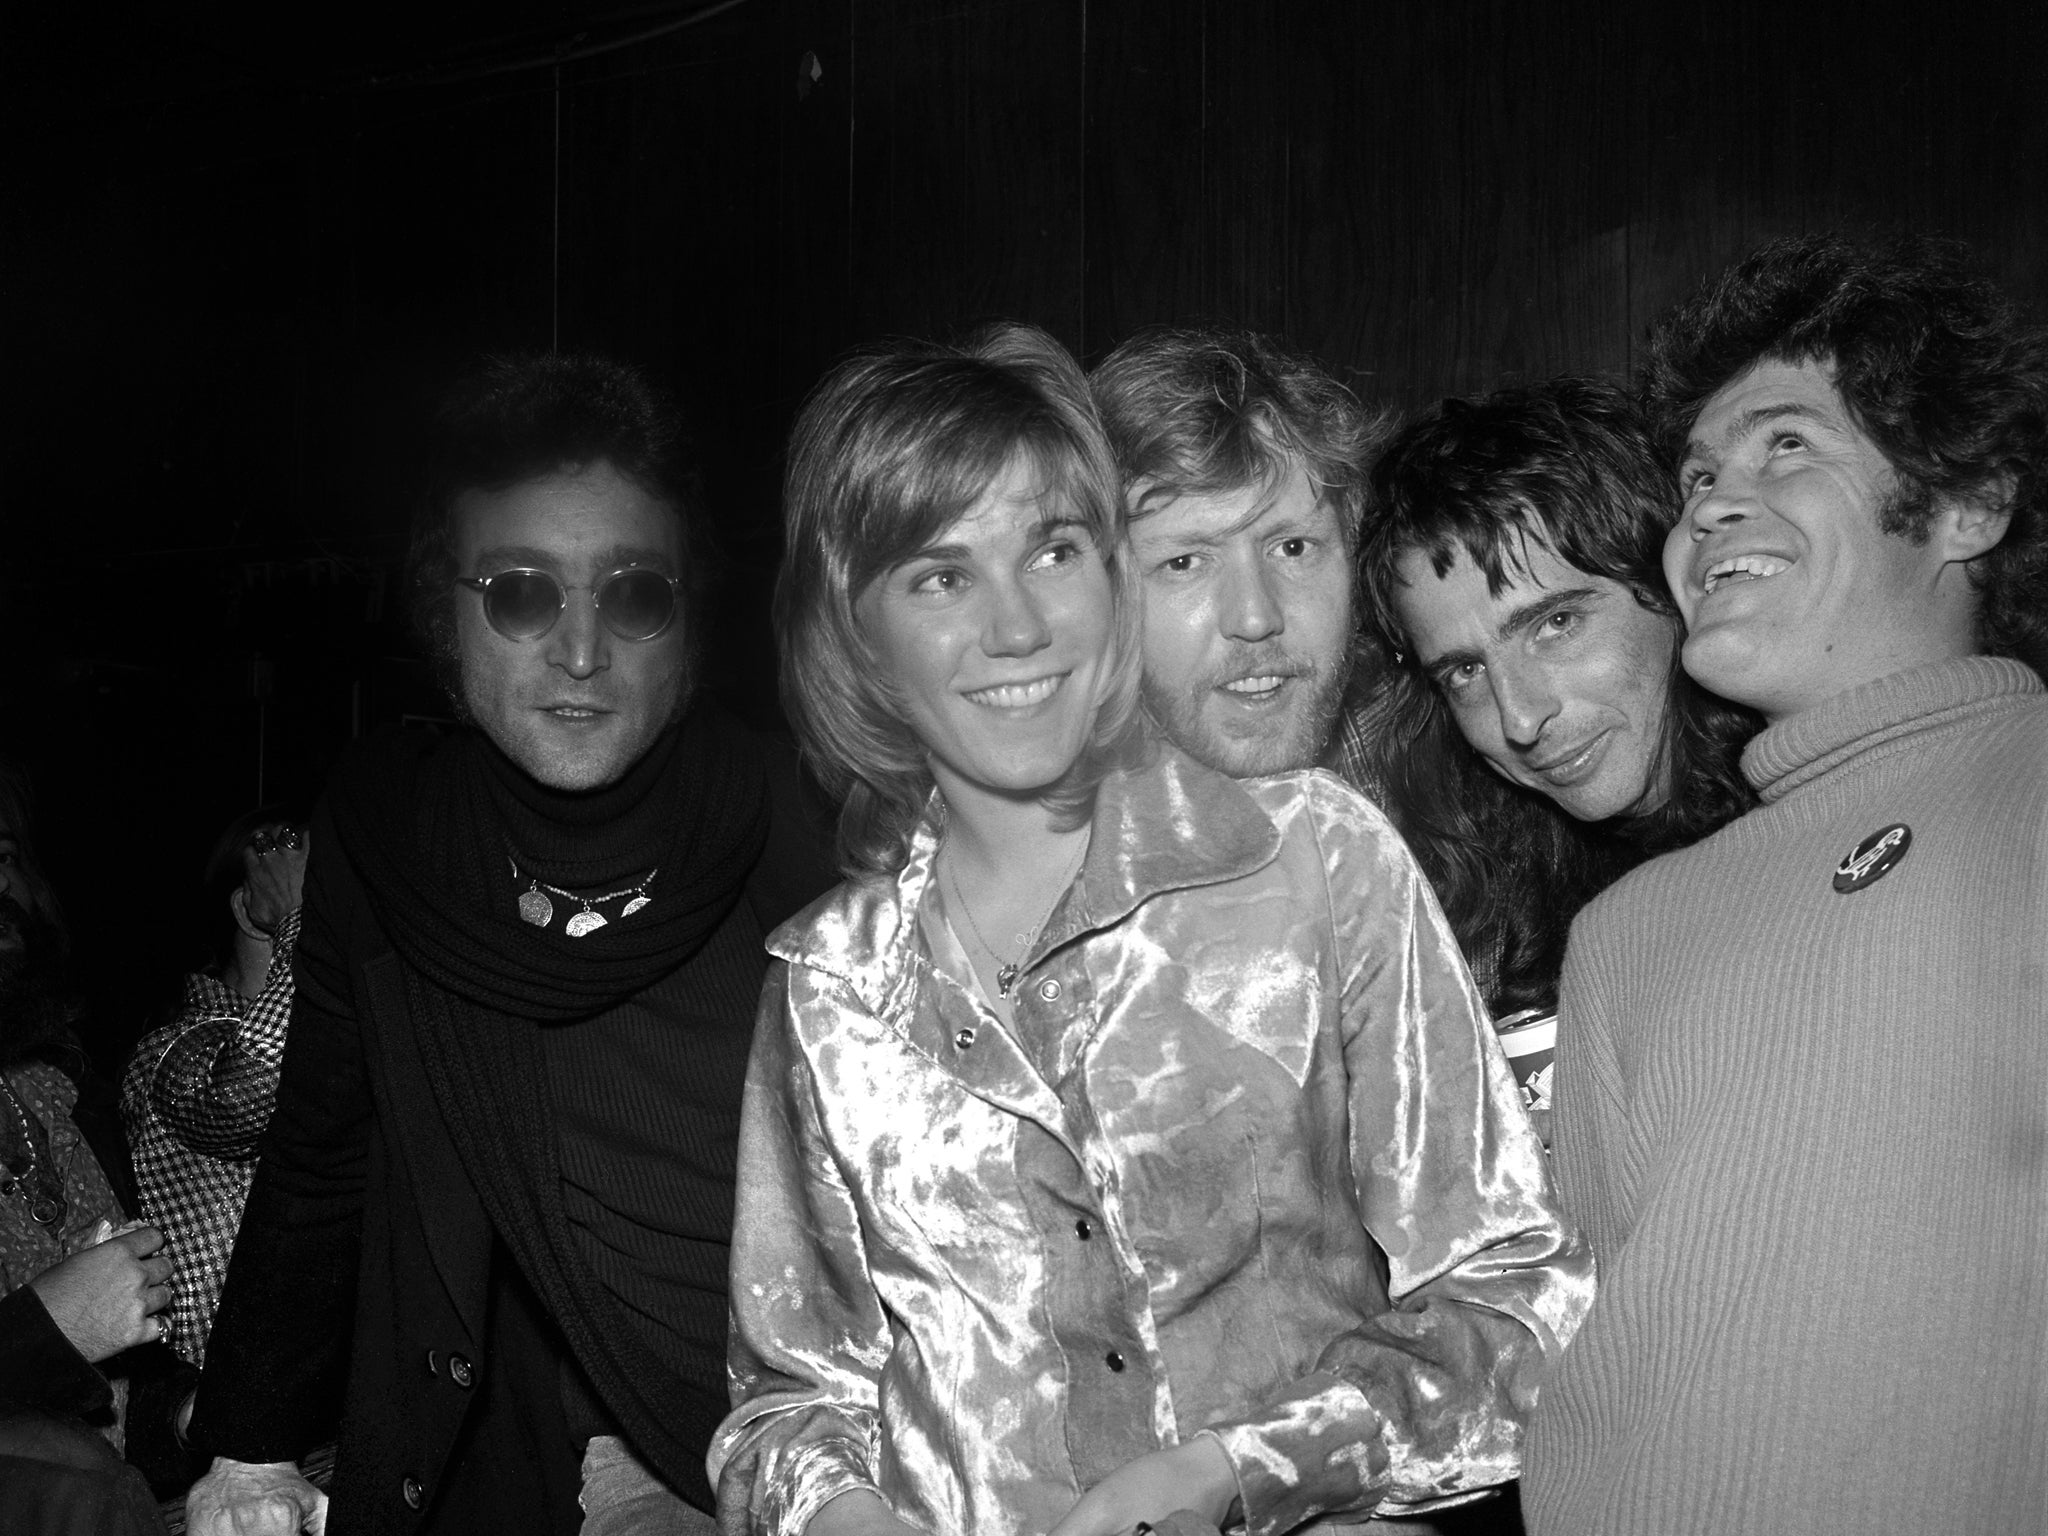 Drinking buddies known as The Hollywood Vampires: John Lennon, Harry Nilsson, Alice Cooper and Micky Dolenz with singer Anne Murray at the Troubadour 